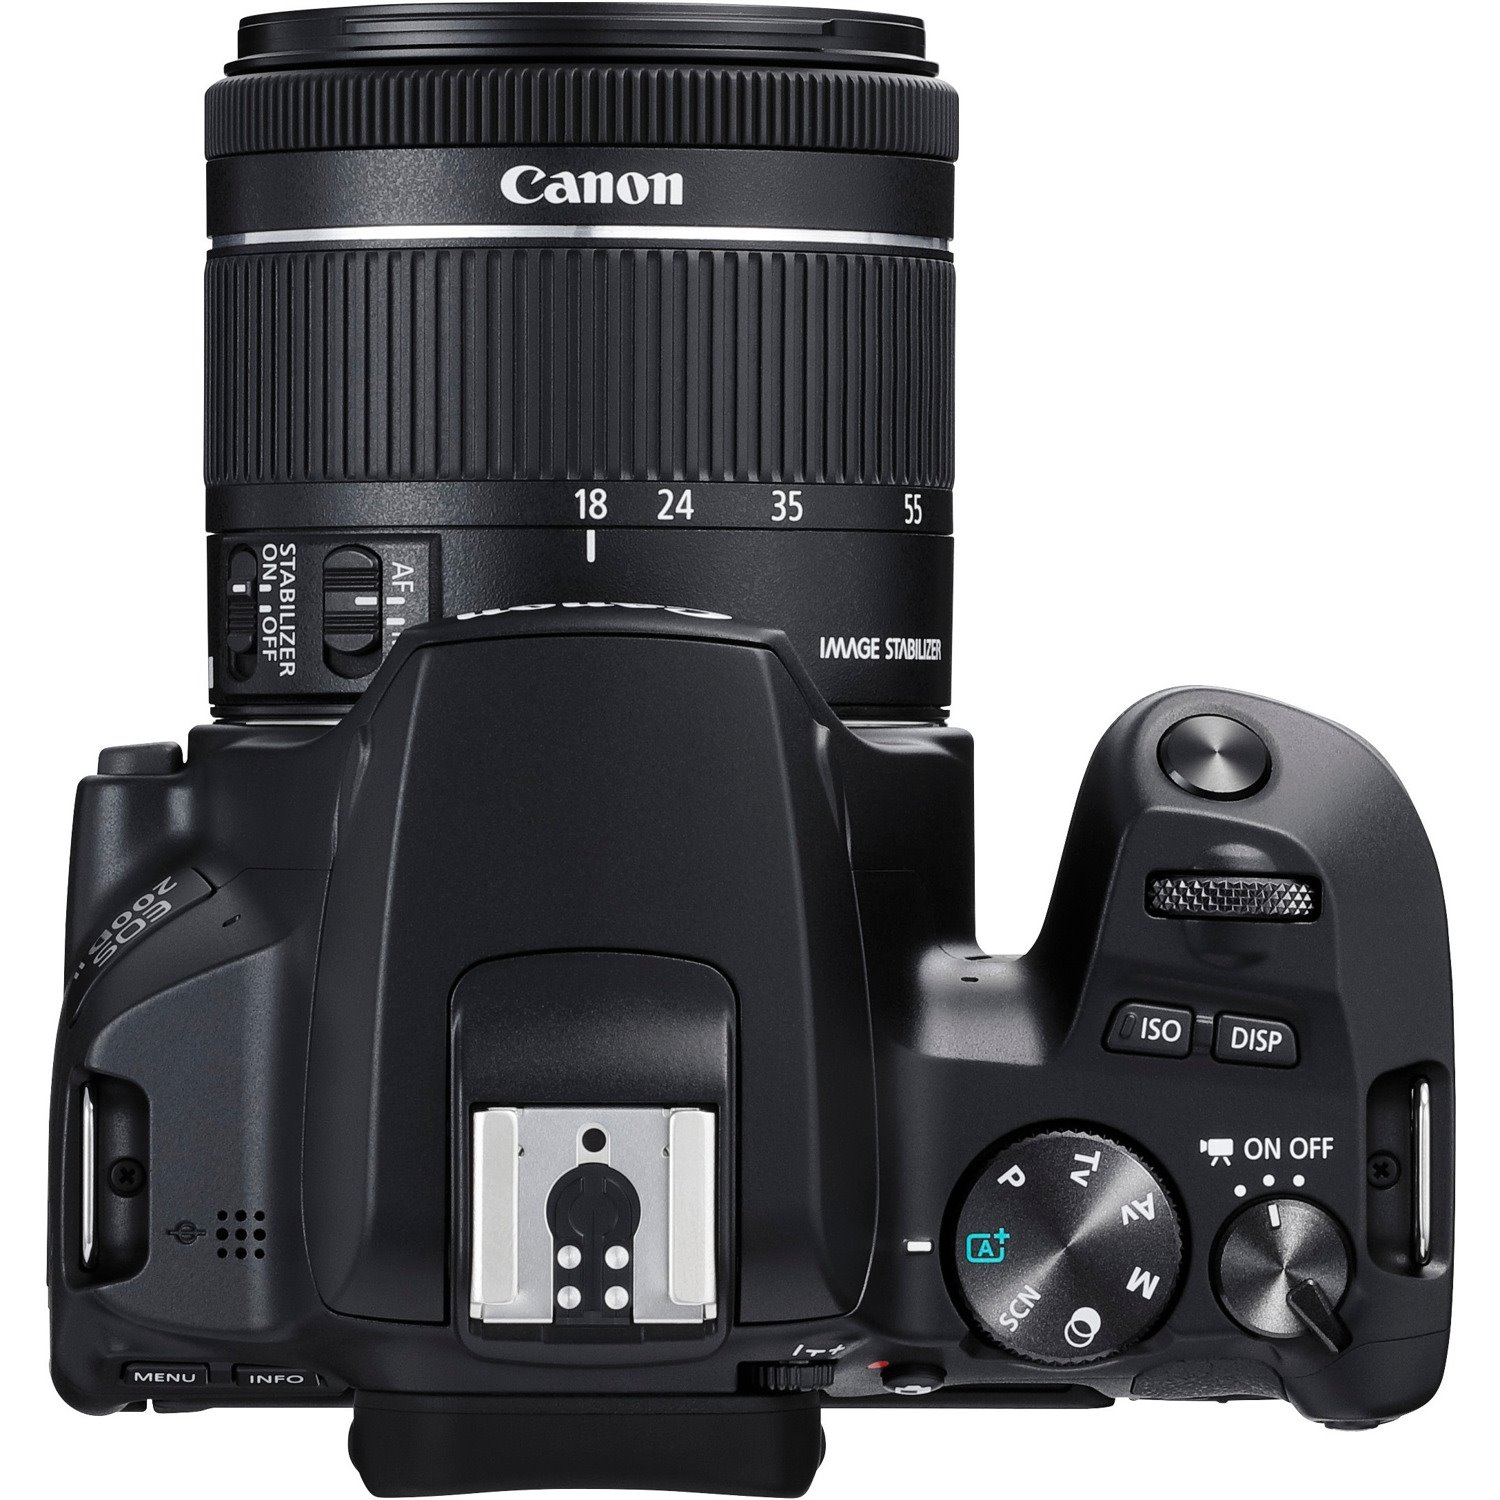 Buy Canon EOS 200D Mark II 24.1 Megapixel Digital SLR Camera with Lens - 18 mm - 55 mm | Your IT 